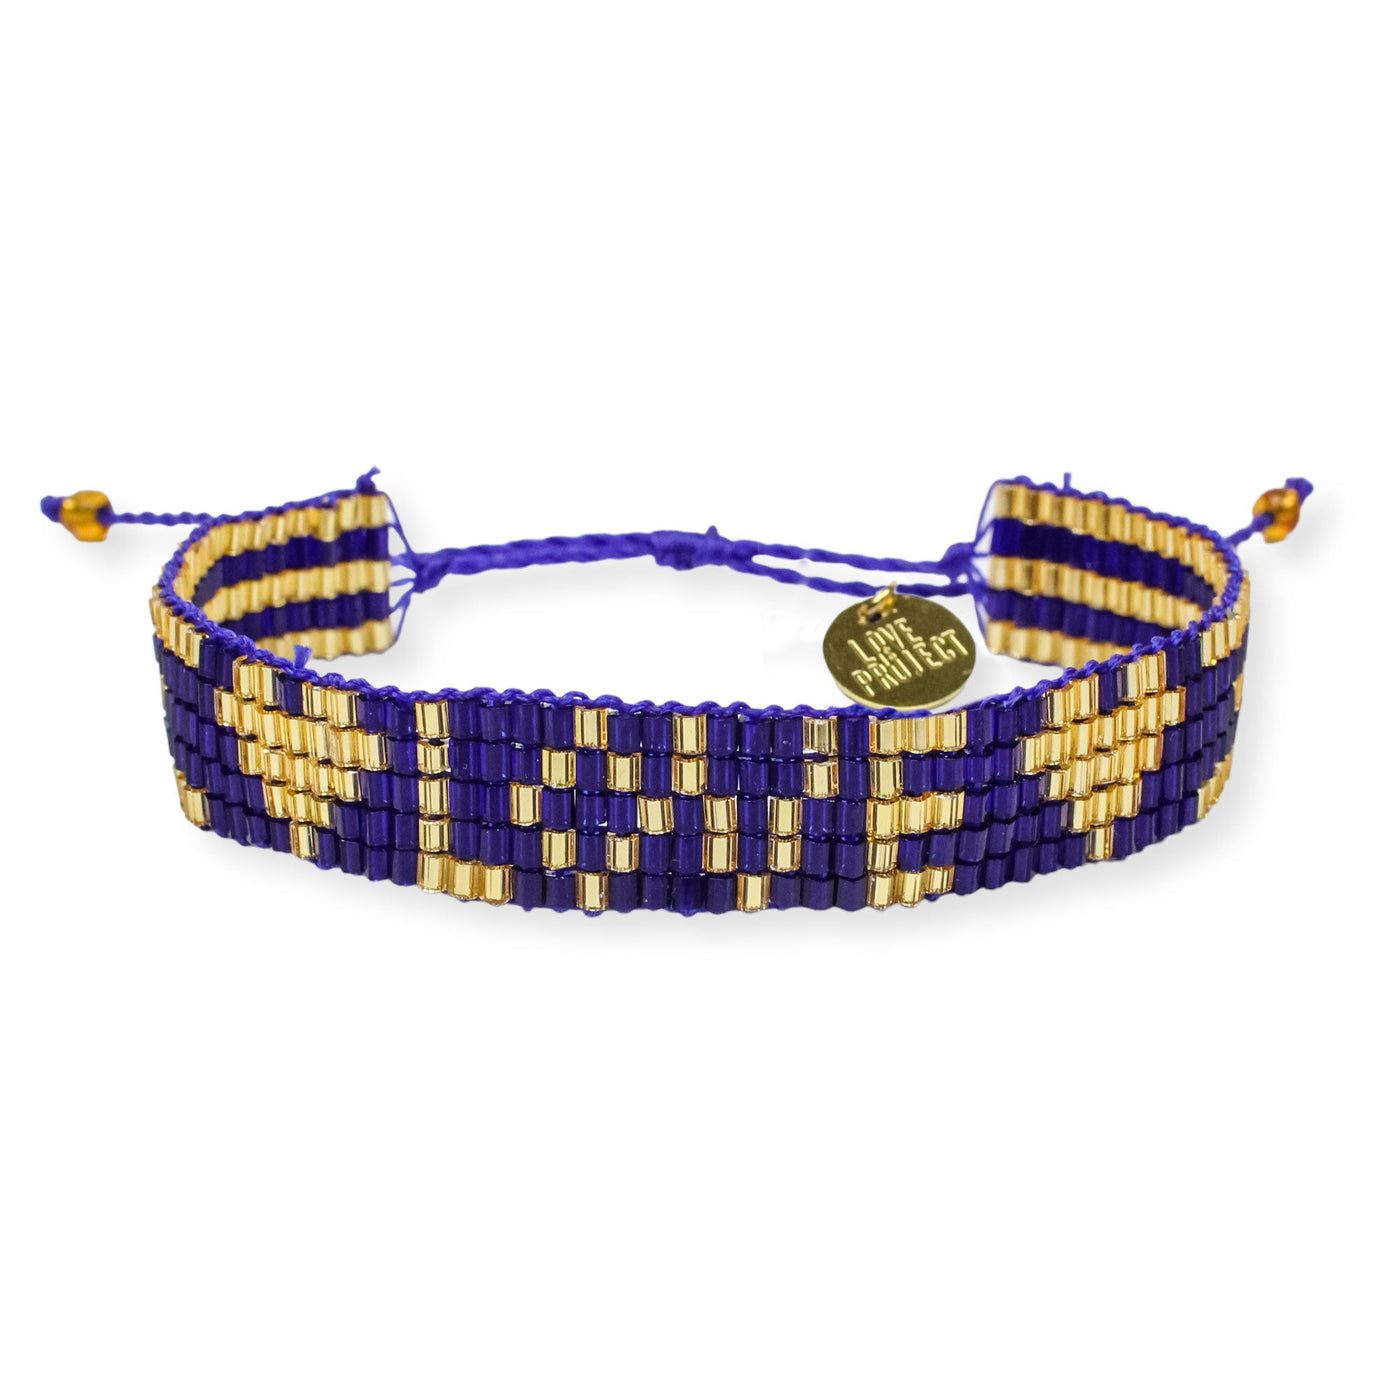 Seed Bead LOVE with Hearts Bracelet - Navy and Gold